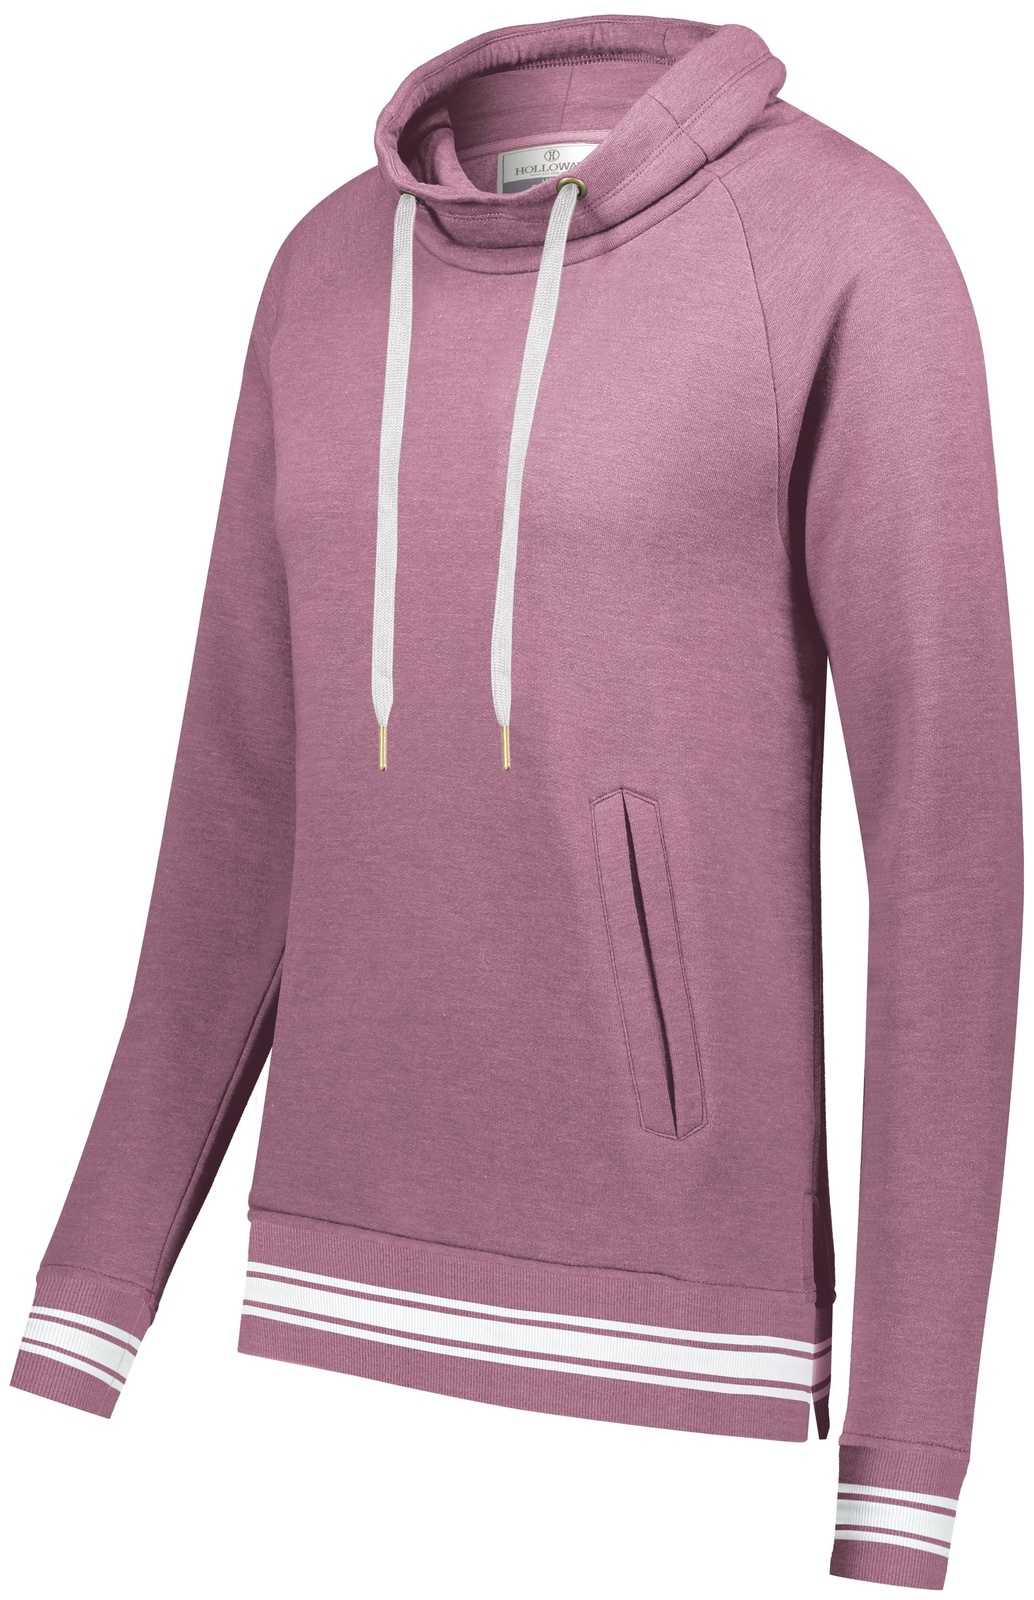 Holloway 229763 Ladies Ivy League Funnel Neck Pullover - Dusty Rose Heather White - HIT a Double